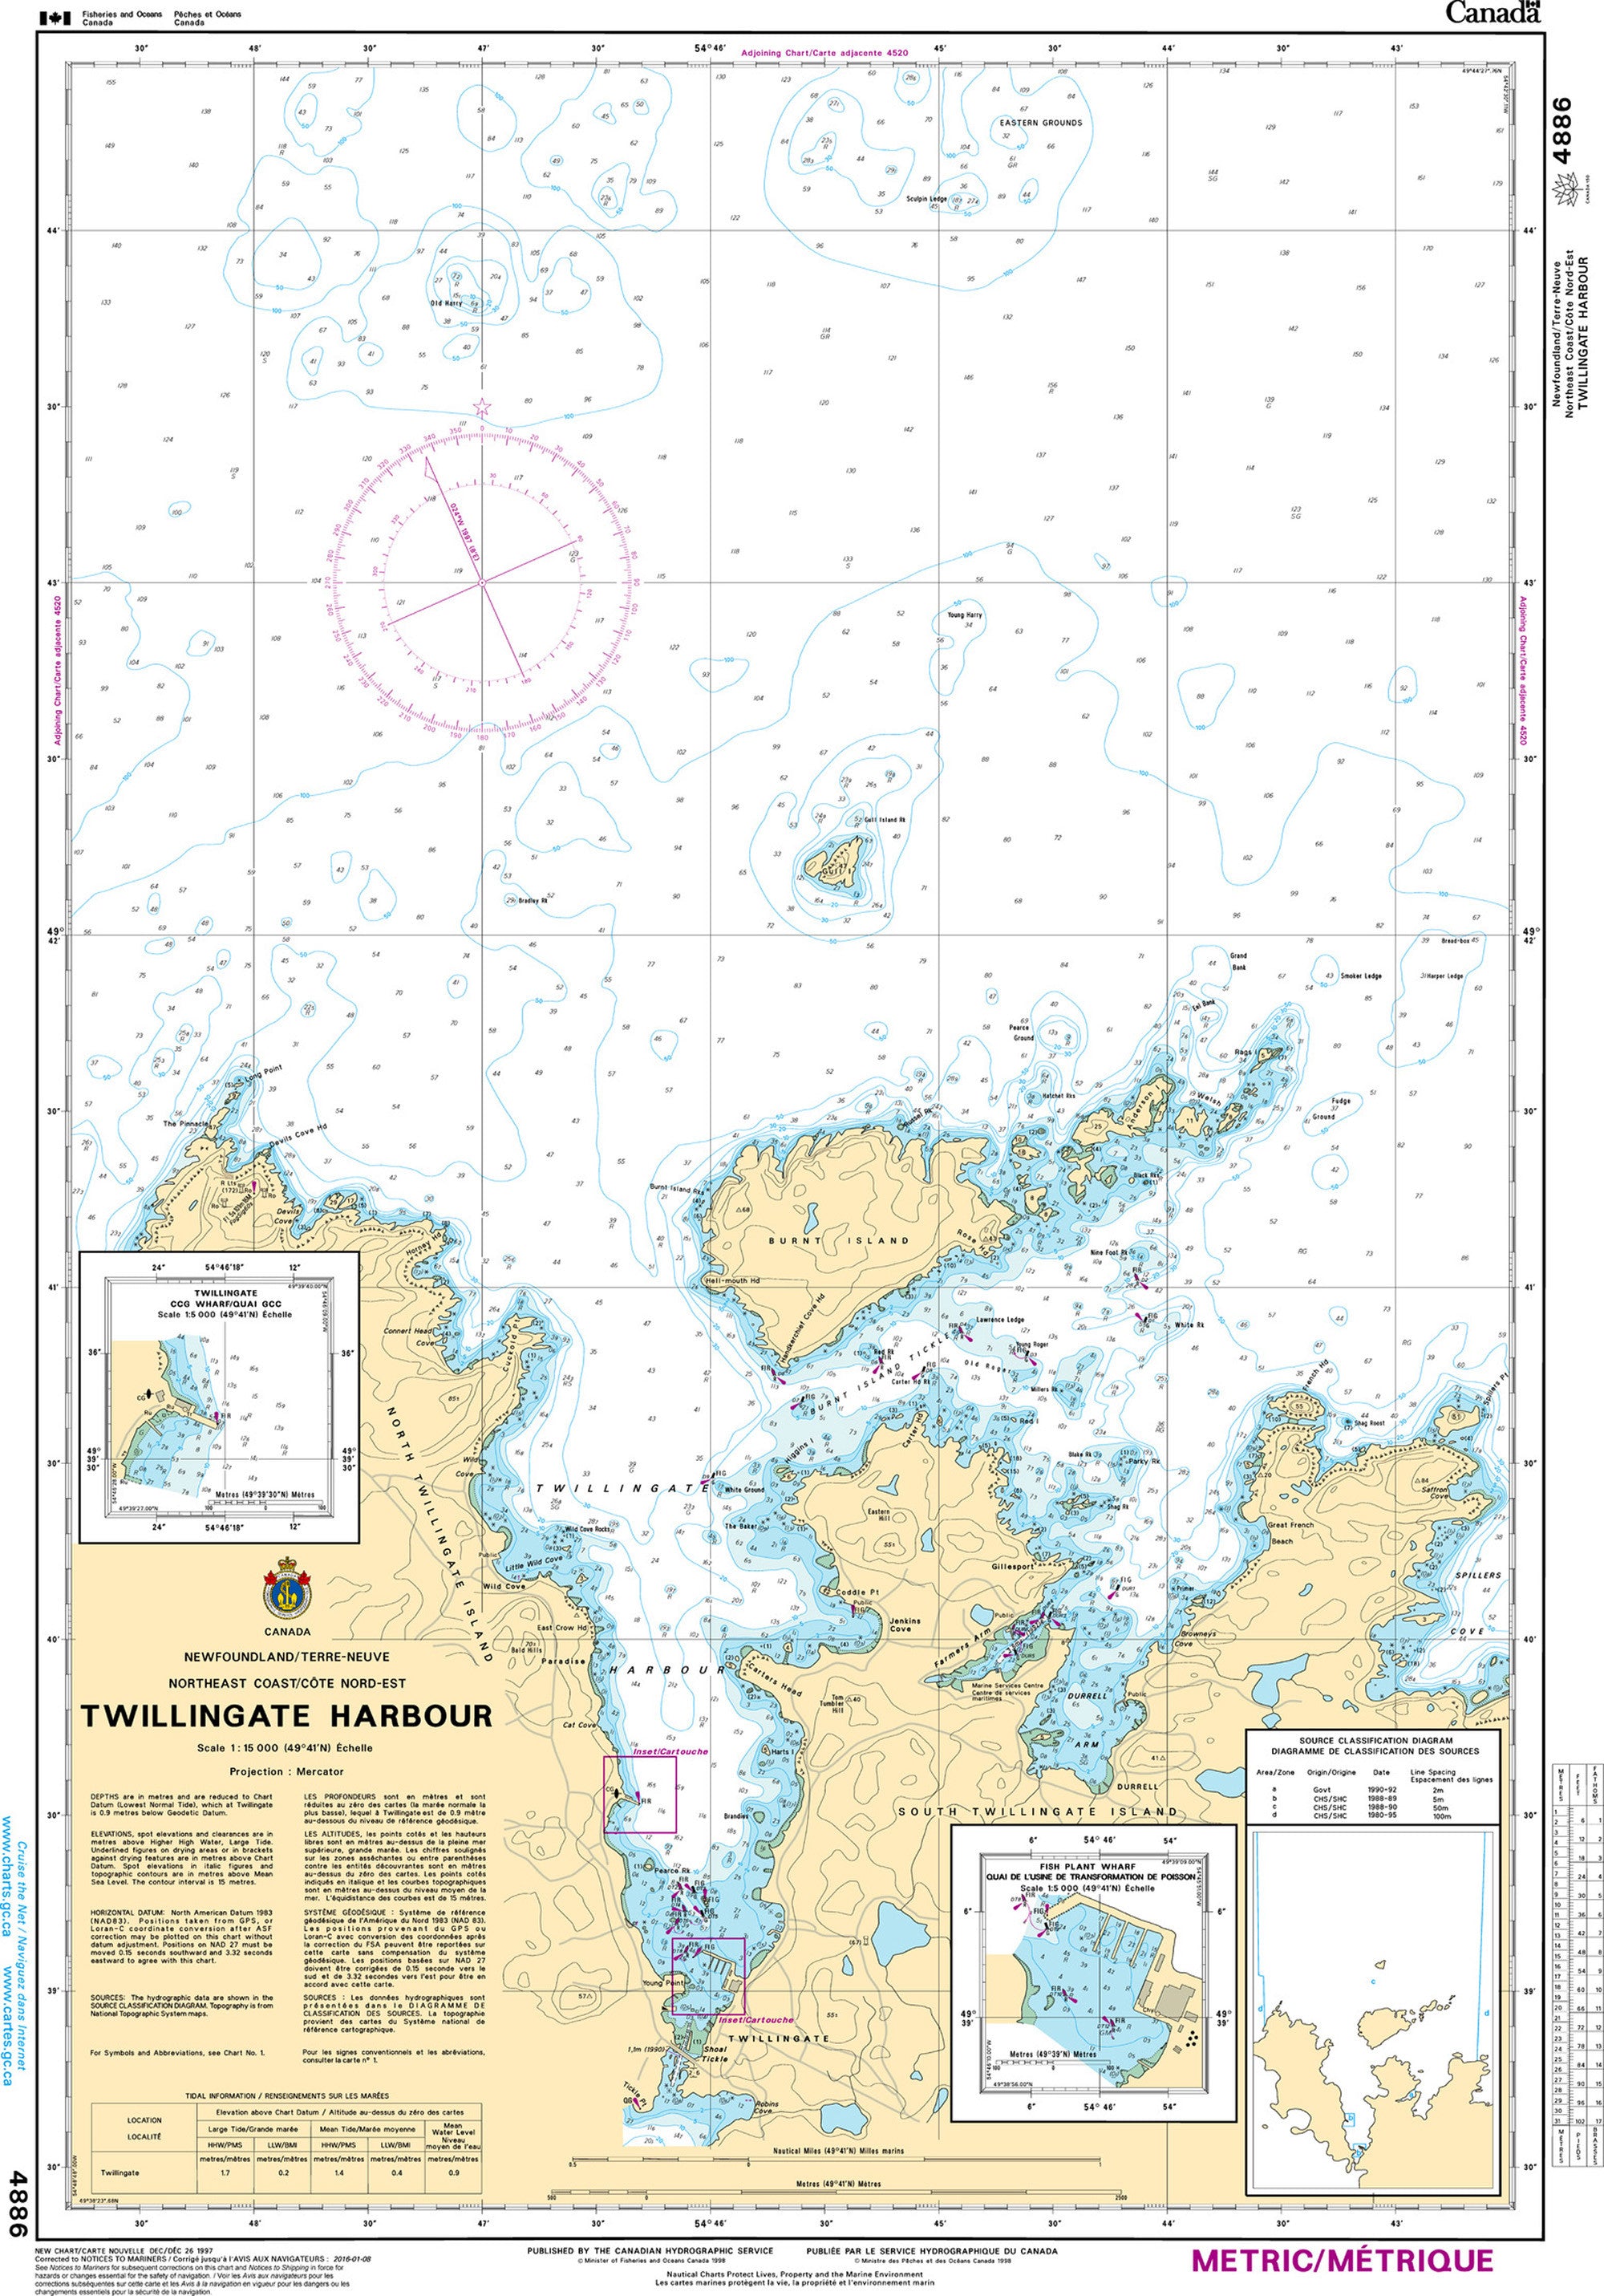 Canadian Hydrographic Service Nautical Chart CHS4886: Twillingate Harbours